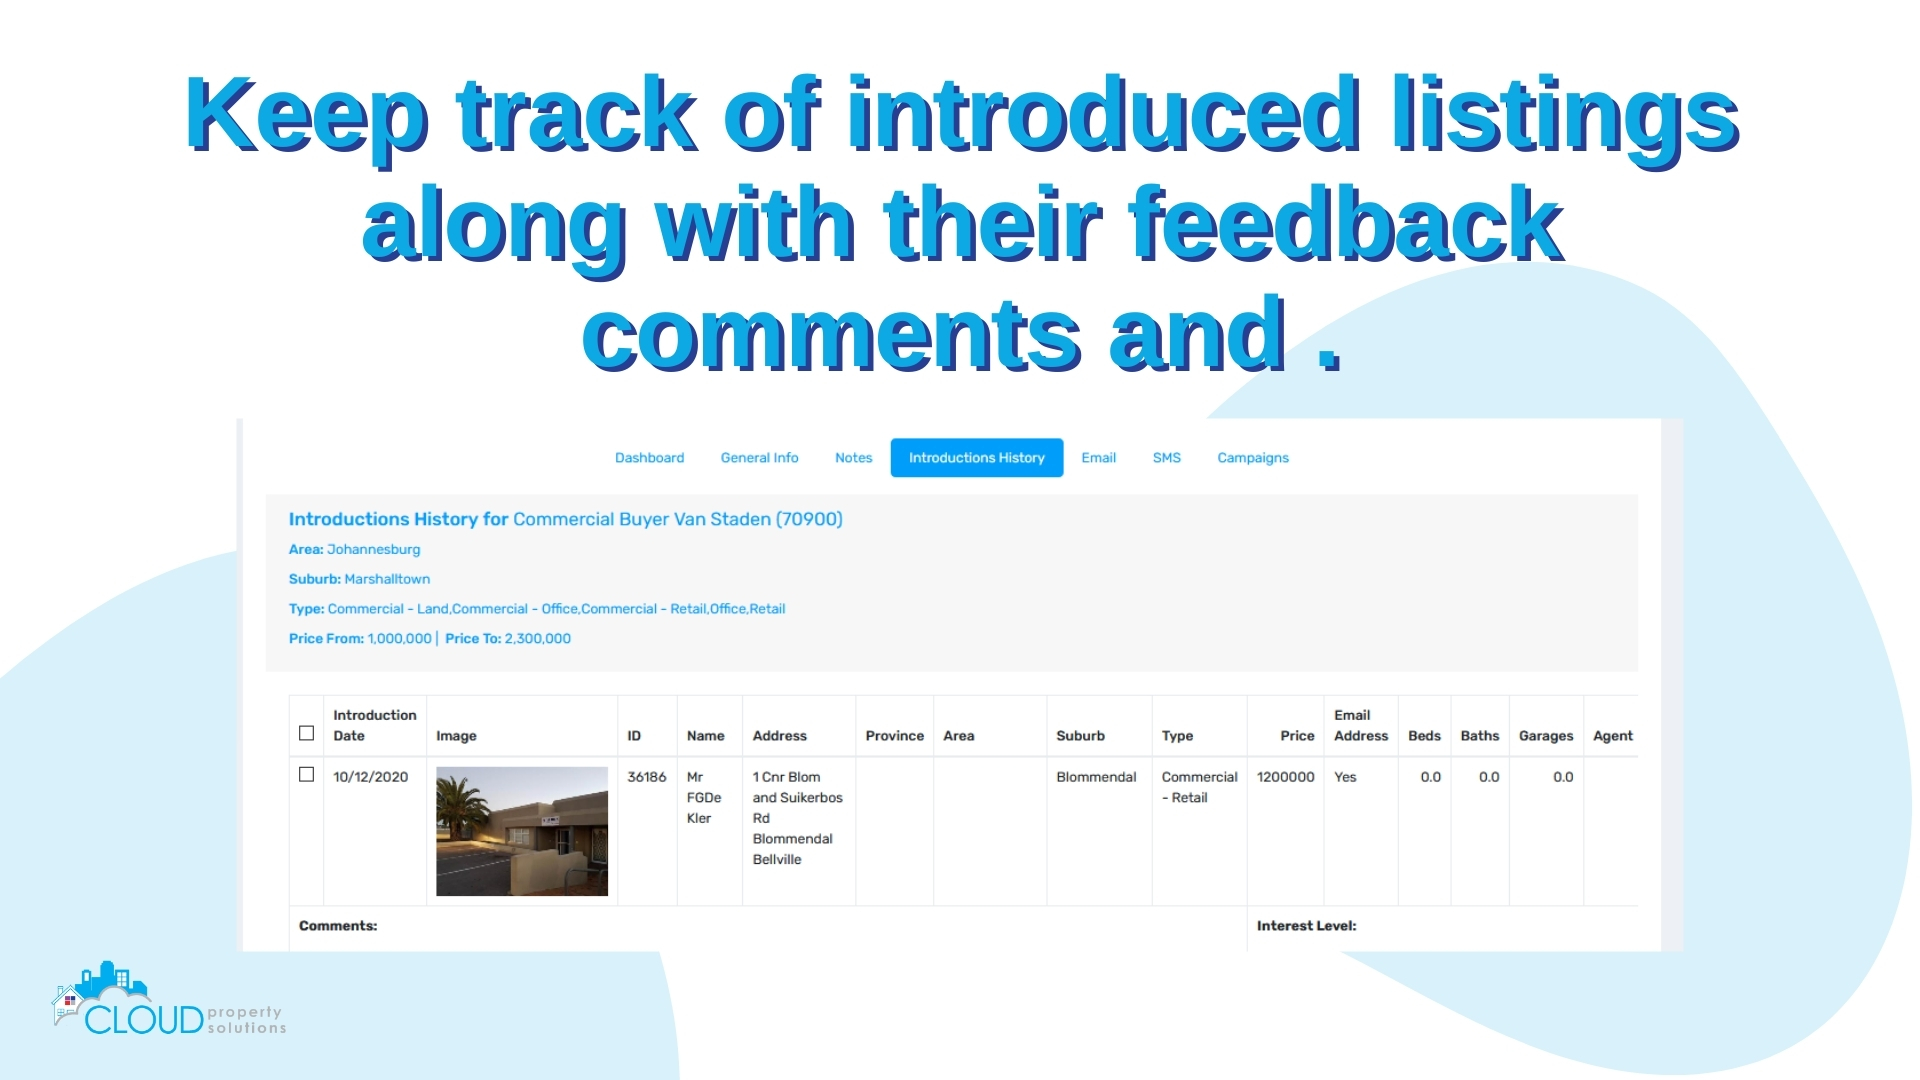 Keep track of listings that have been introduced along with their interest levels.